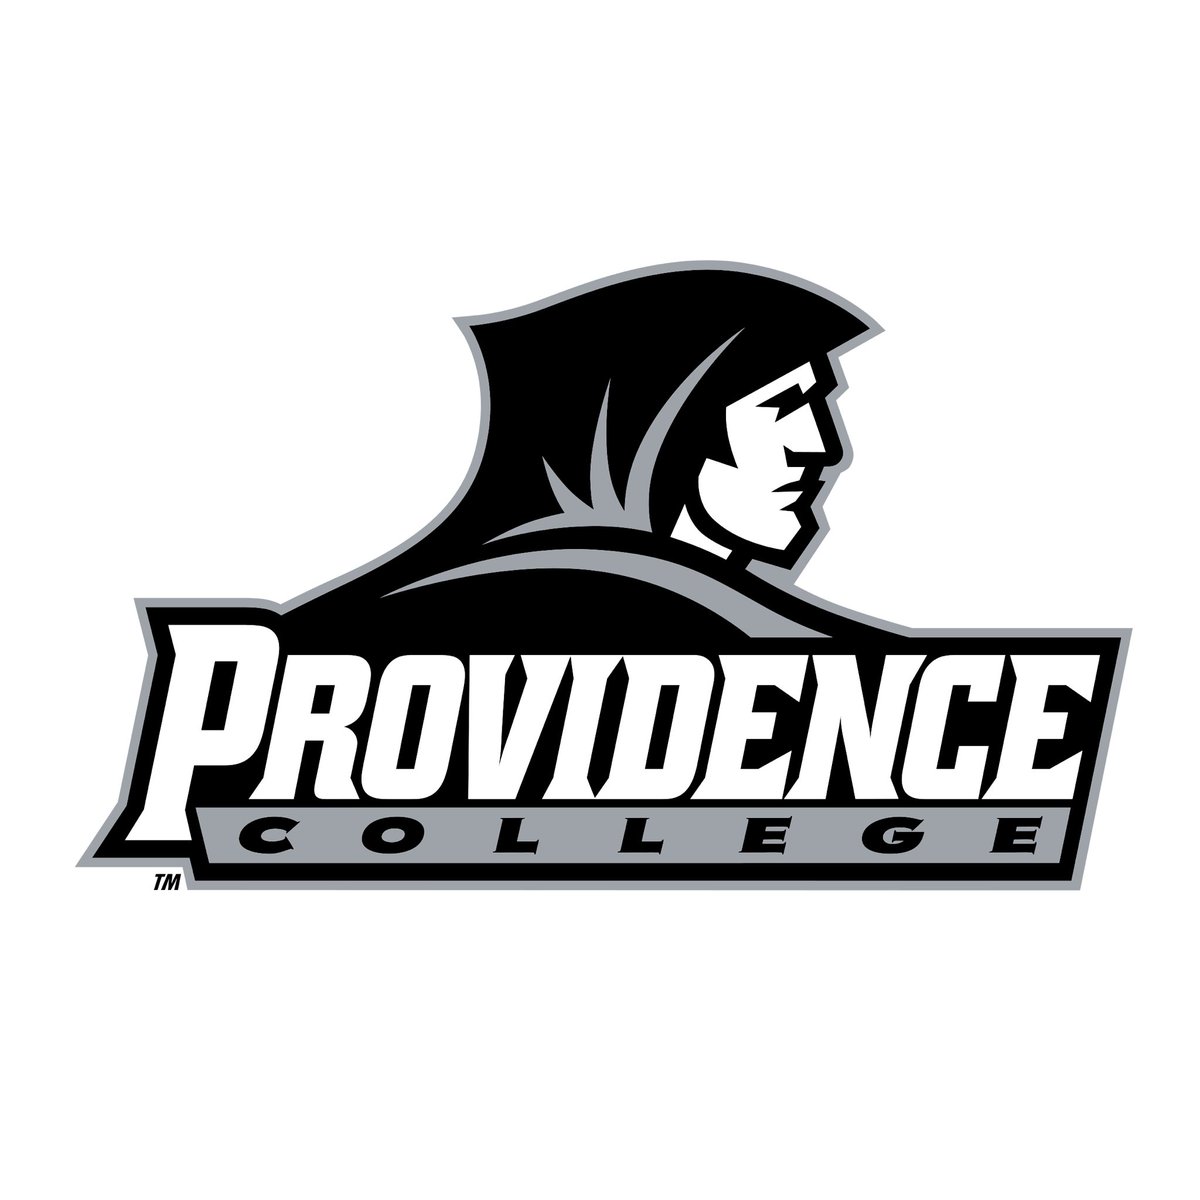 I am honored to receive an offer from @ProvidenceWBB. Thank you @CoachErinBatth for a great conversation. I am looking forward to learning more about the program, seeing the university, and meeting the team and staff! @TeamNEHoops